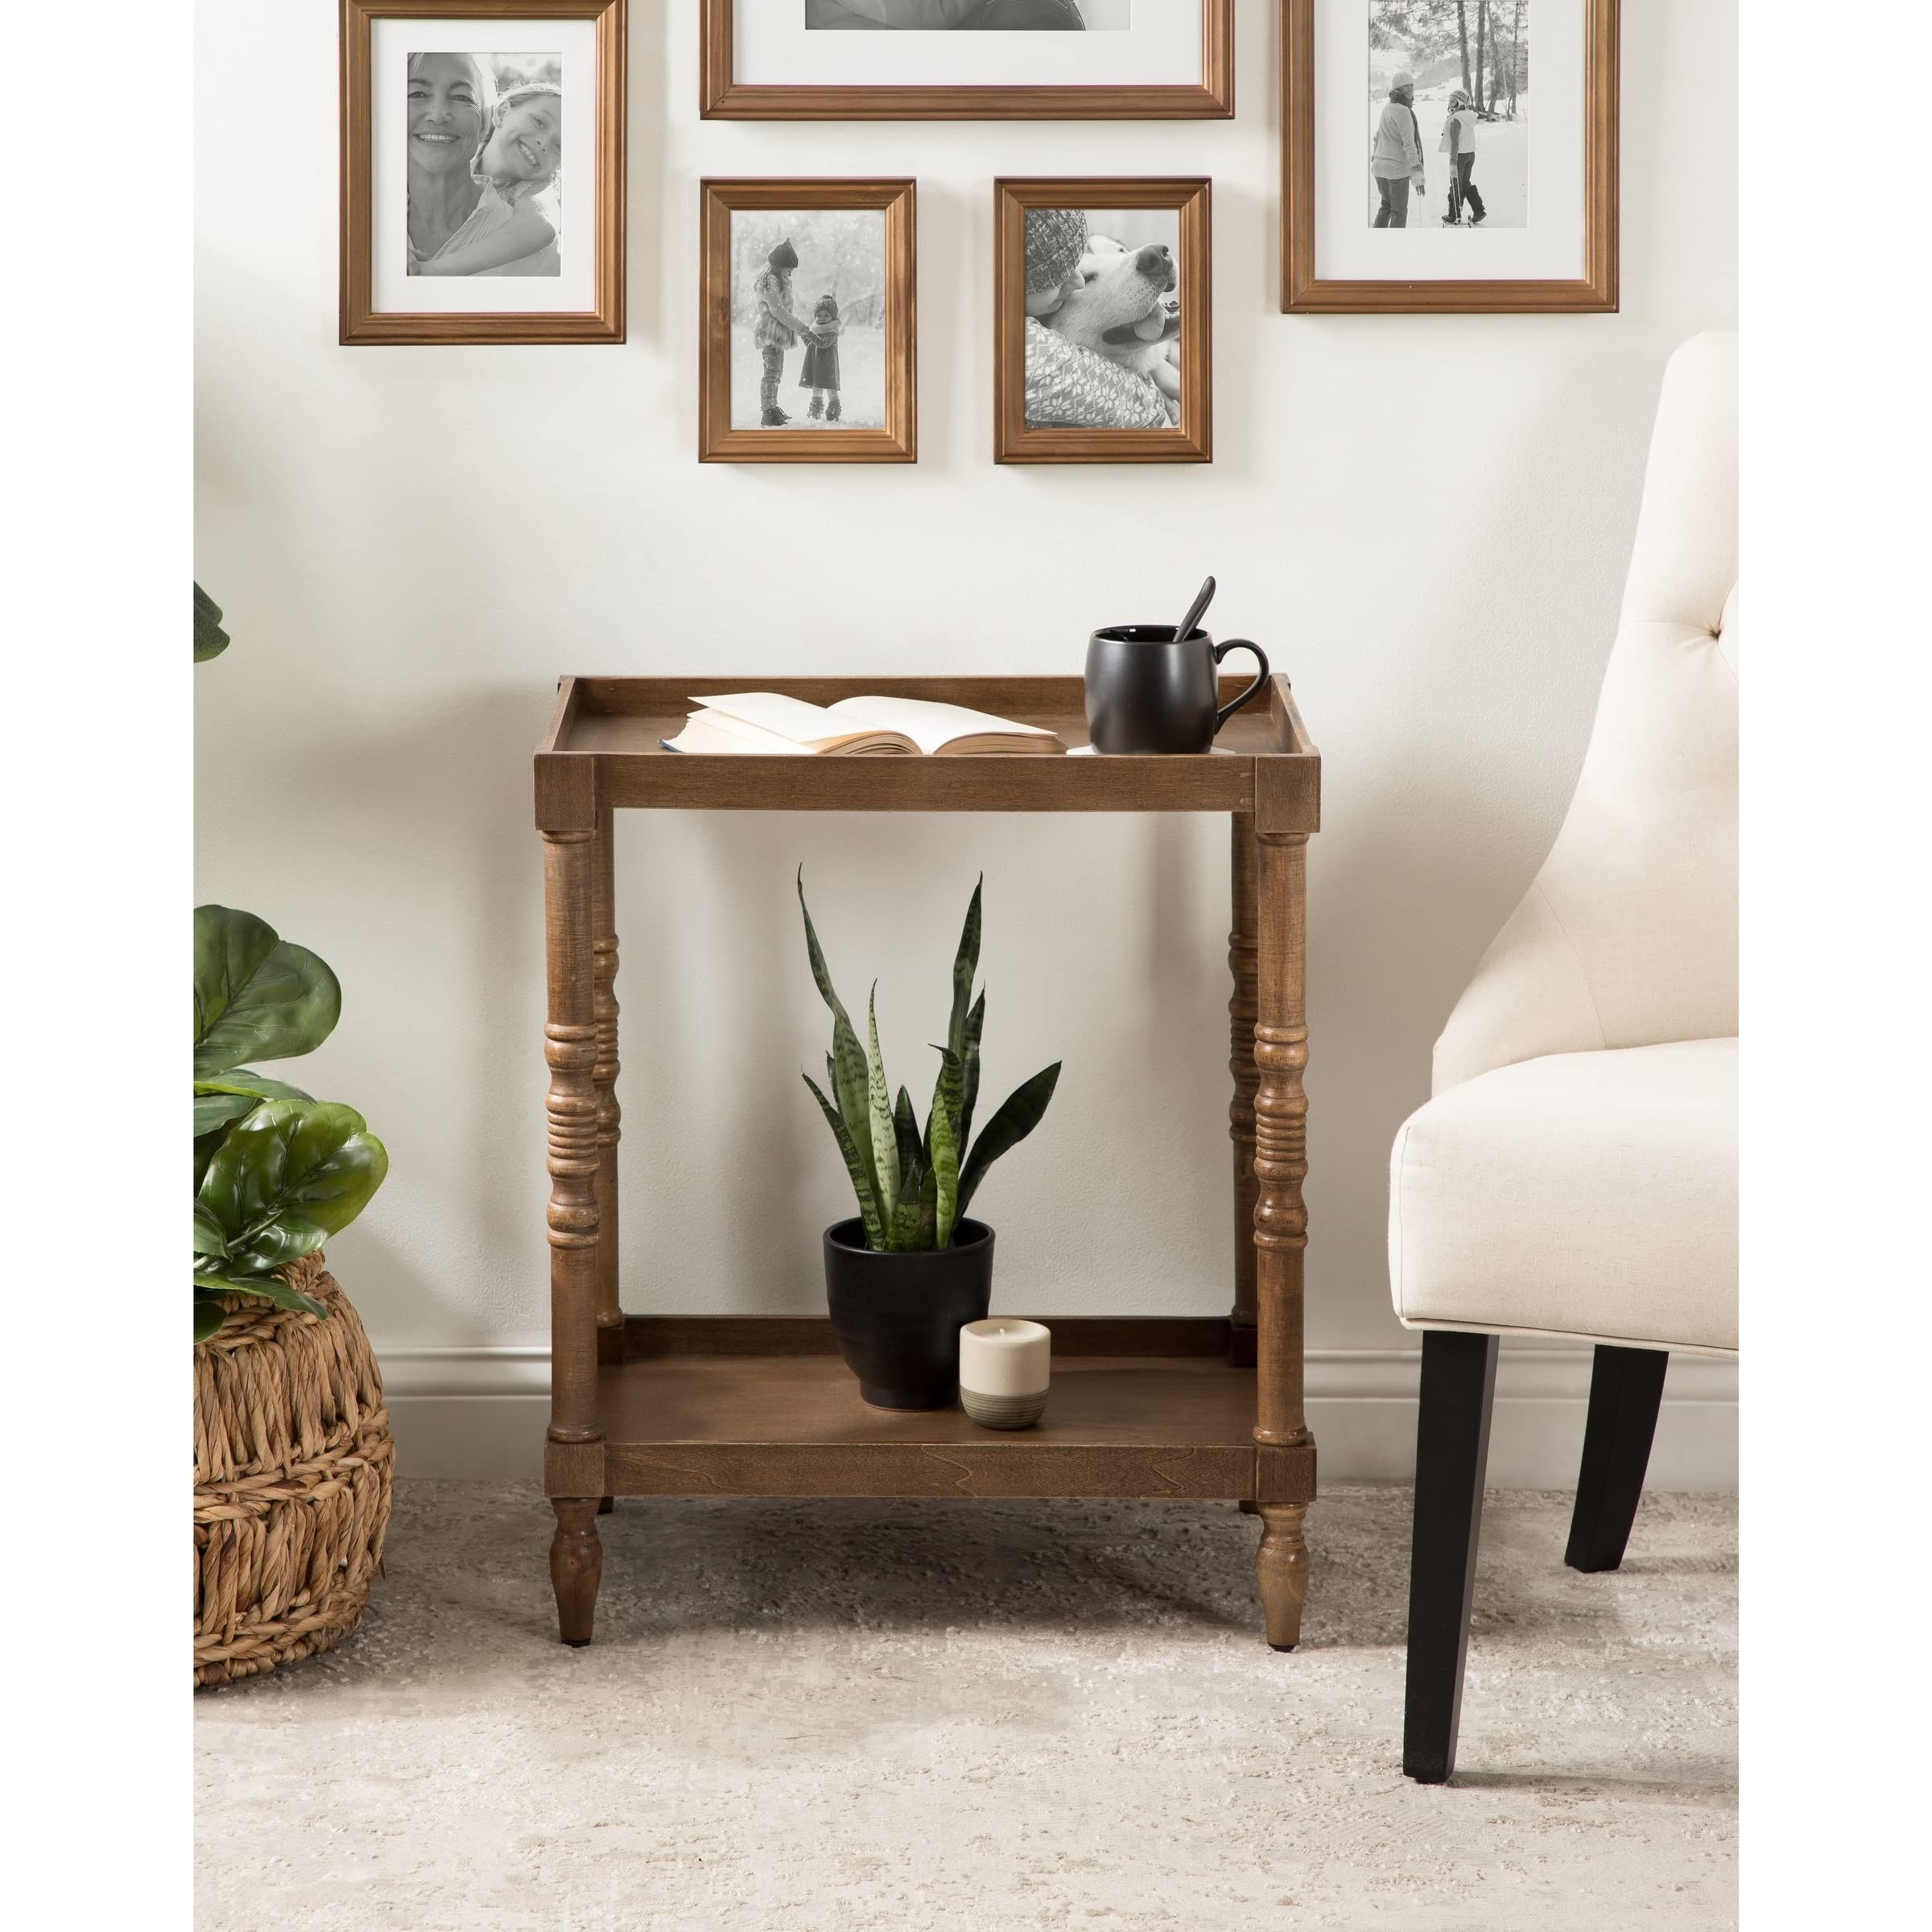 Most Recently Released Kate And Laurel Bellport Farmhouse Drink Tables Intended For Amazon: Kate And Laurel Bellport Farmhouse Side Table, 22 X 14 X 26,  Rustic Brown, Decorative Rectangular End Table For Storage And Display :  Everything Else (View 8 of 10)